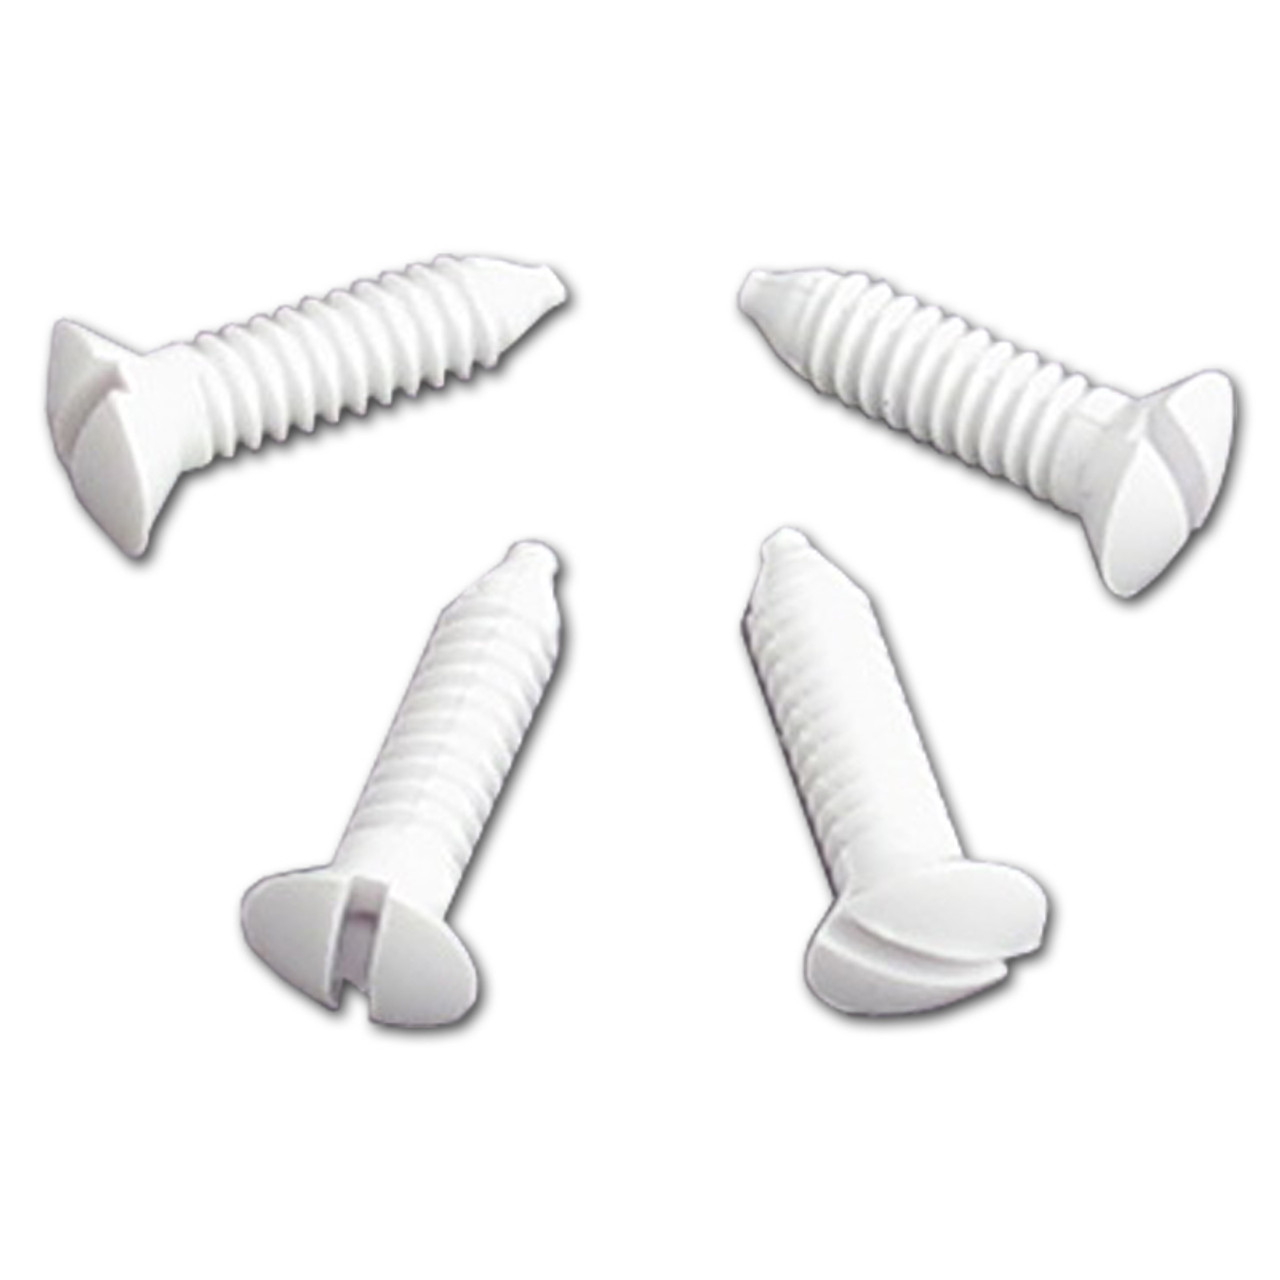 2-Pack White Replacement Screws - Touch-Plate Lighting & Controls